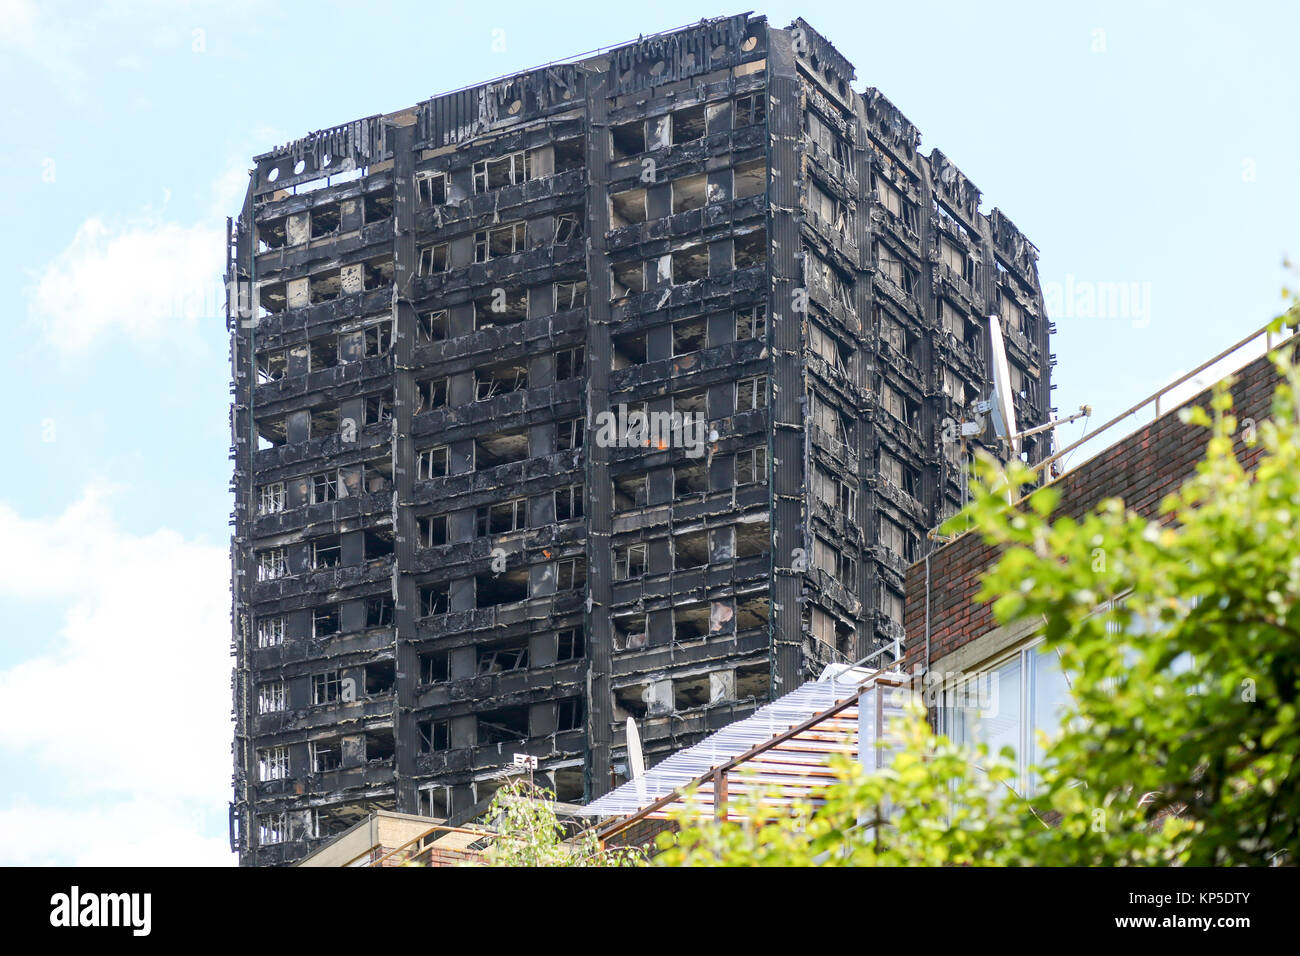 8th July 2017. Grenfell Tower, 24 days after the fire on the 14th June 2017 which claimed the lives of 71 people, including one stillbirth. Stock Photo